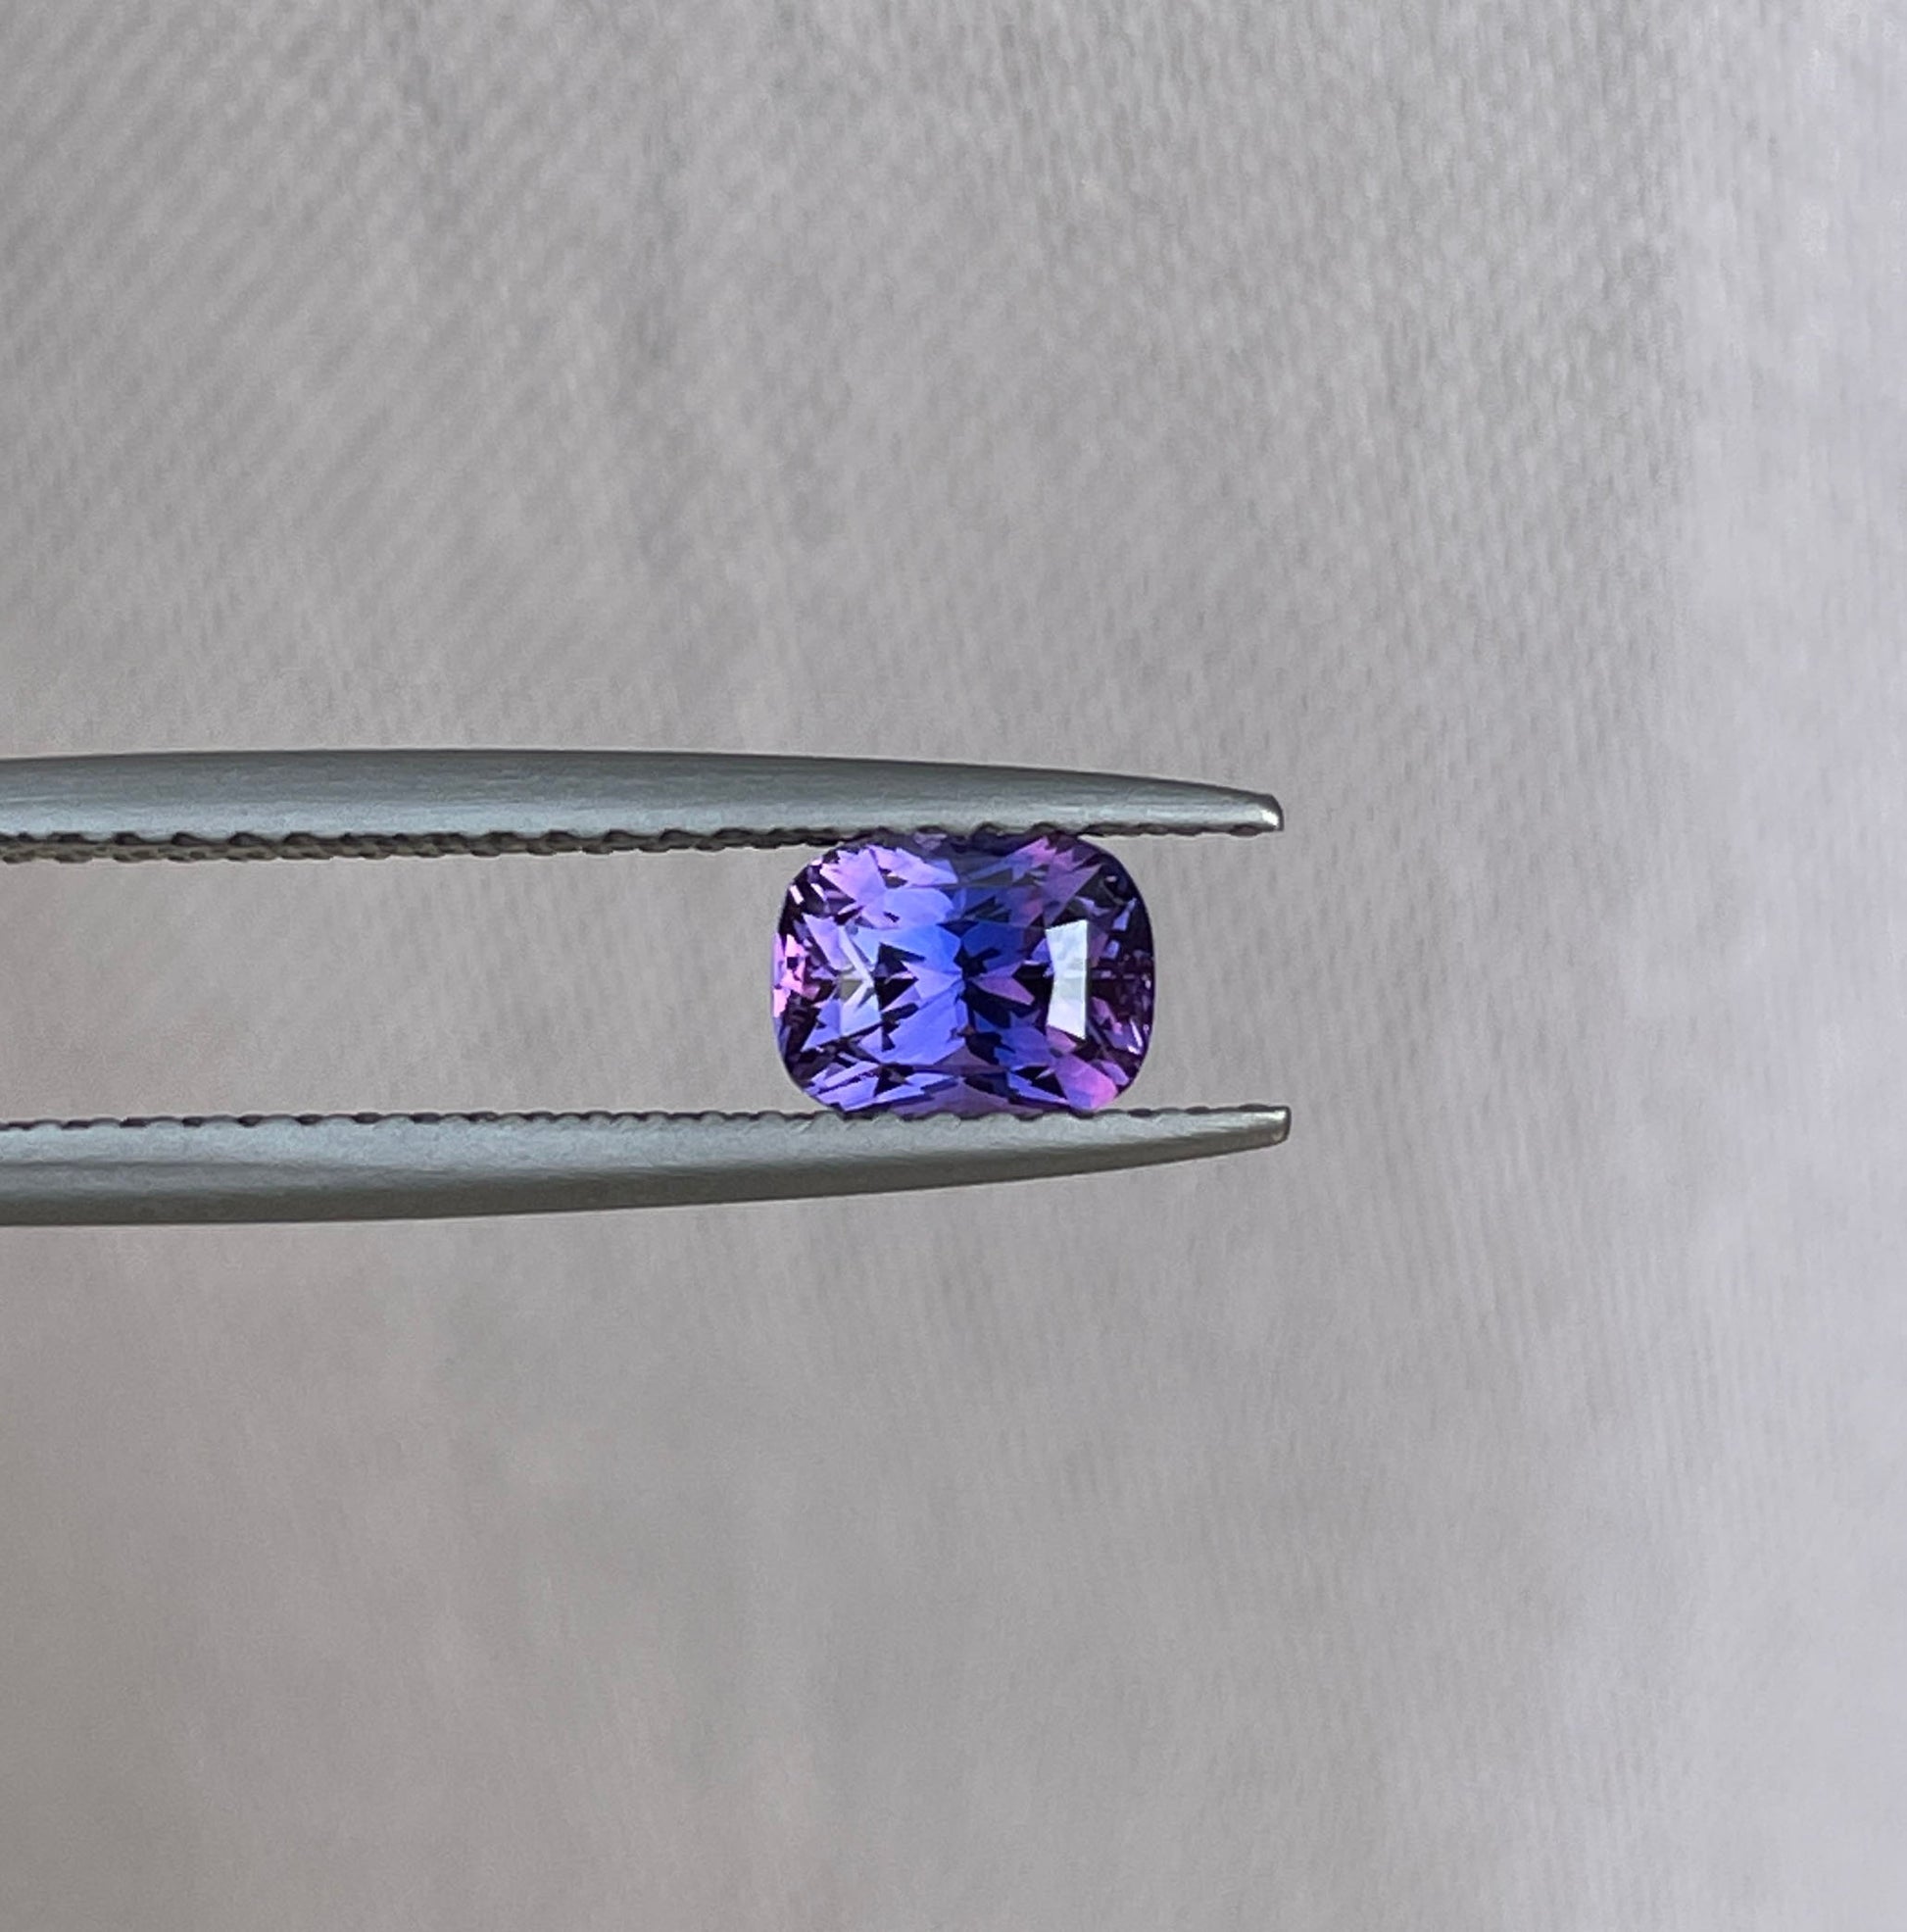 AAA Color change Ceylon violet Sapphire Loose cushion Cut Gemstone, Fine Quality violet Sapphire Ring And Jewelry Making Gemstone 1.02 Ct - NASHGEMS